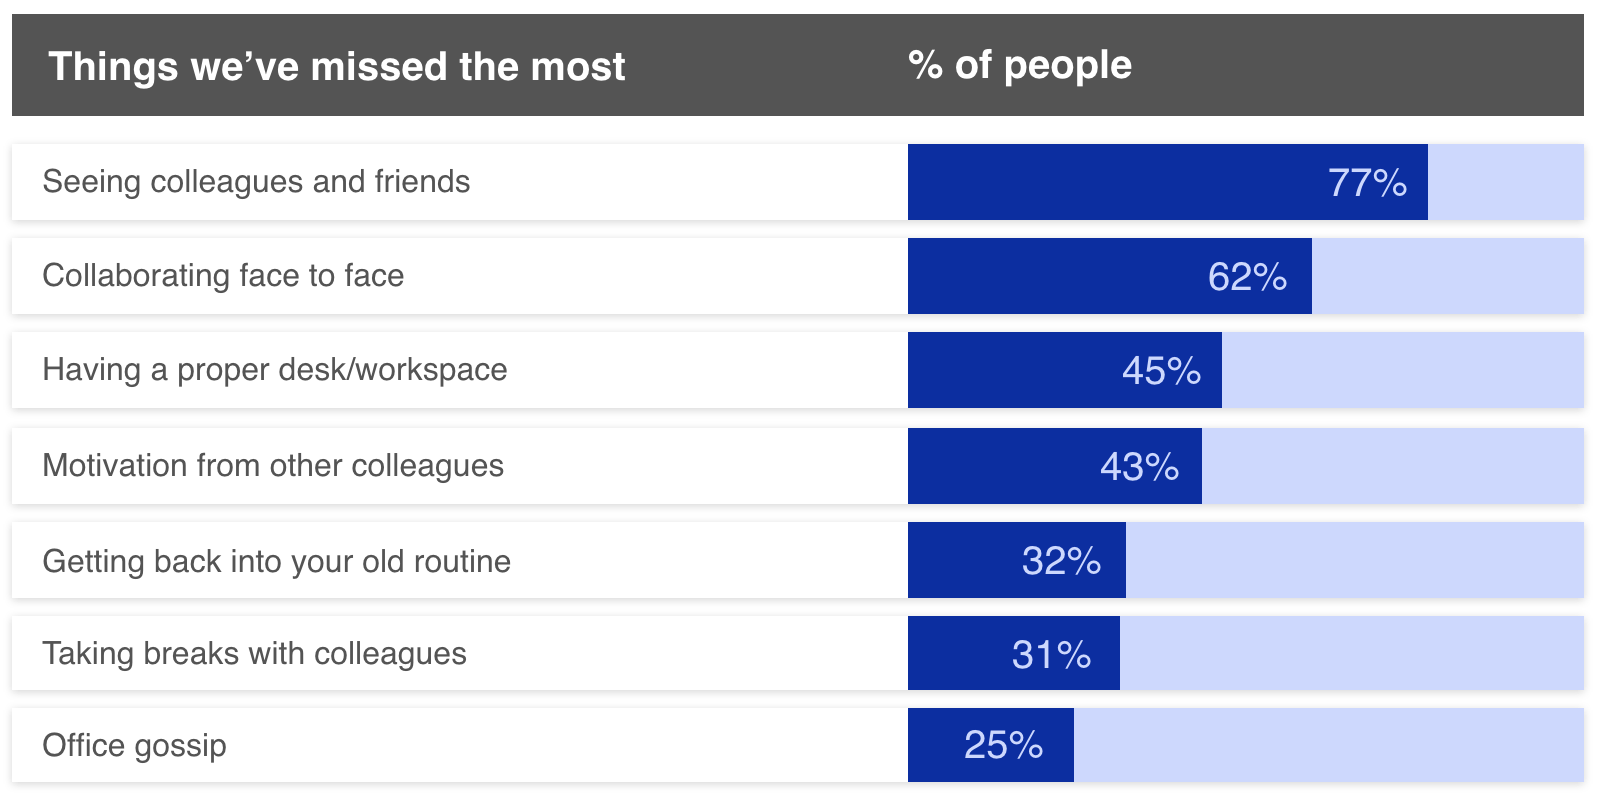 Bar chart showing things most missed about the workplace by percentage